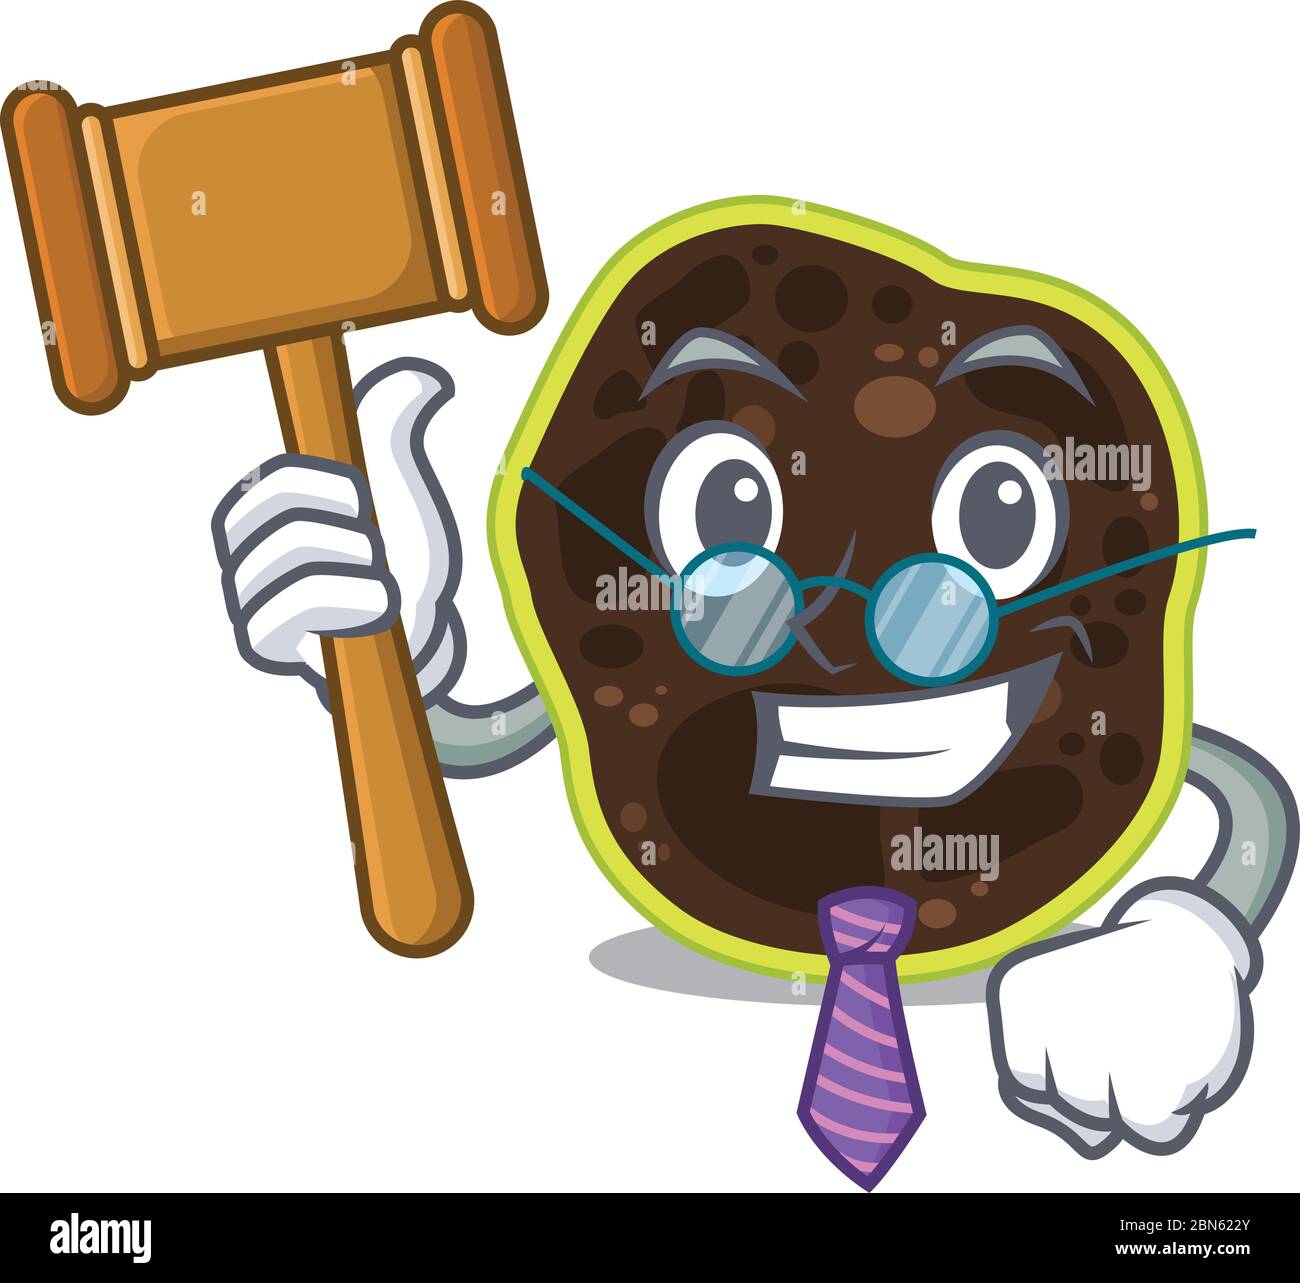 A wise judge of firmicutes mascot design wearing glasses Stock Vector